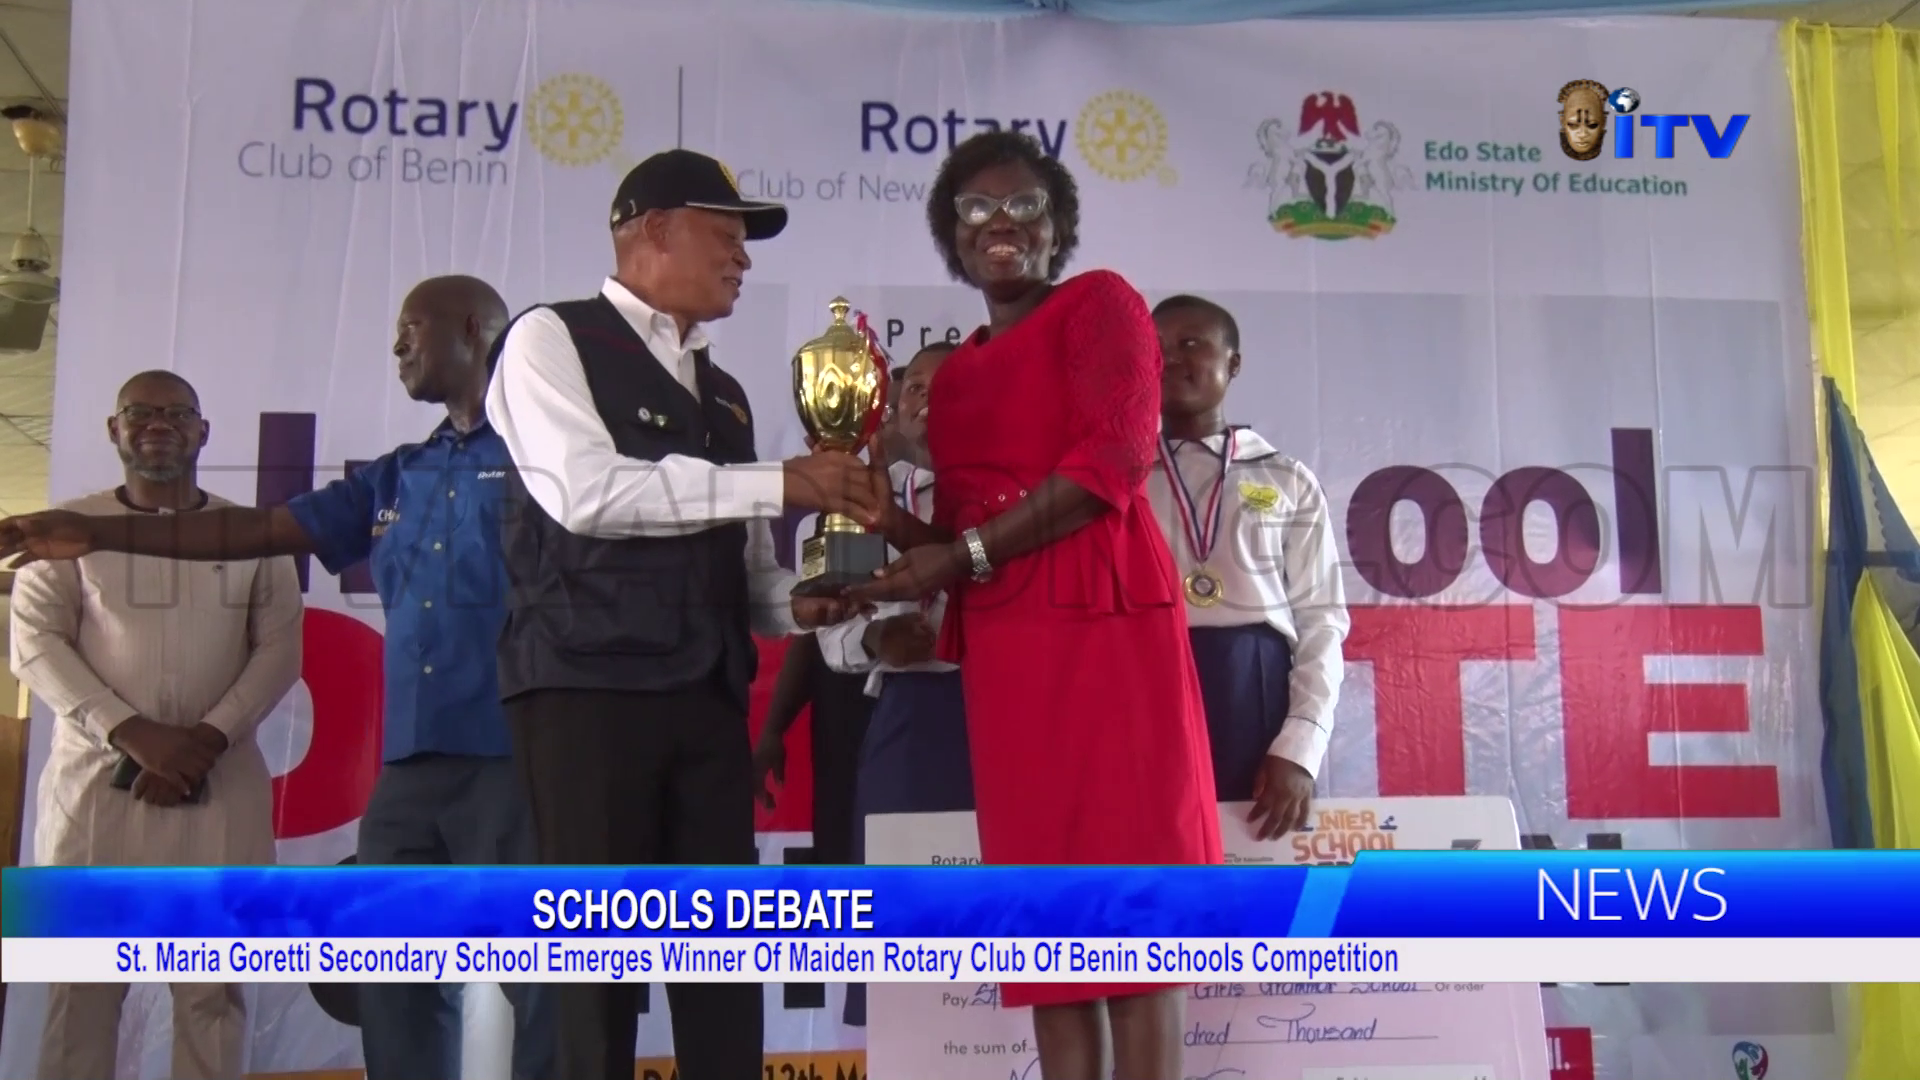 St. Maria Goretti Secondary School Emerges Winner Of Maiden Rotary Club Of Benin Schools Competition